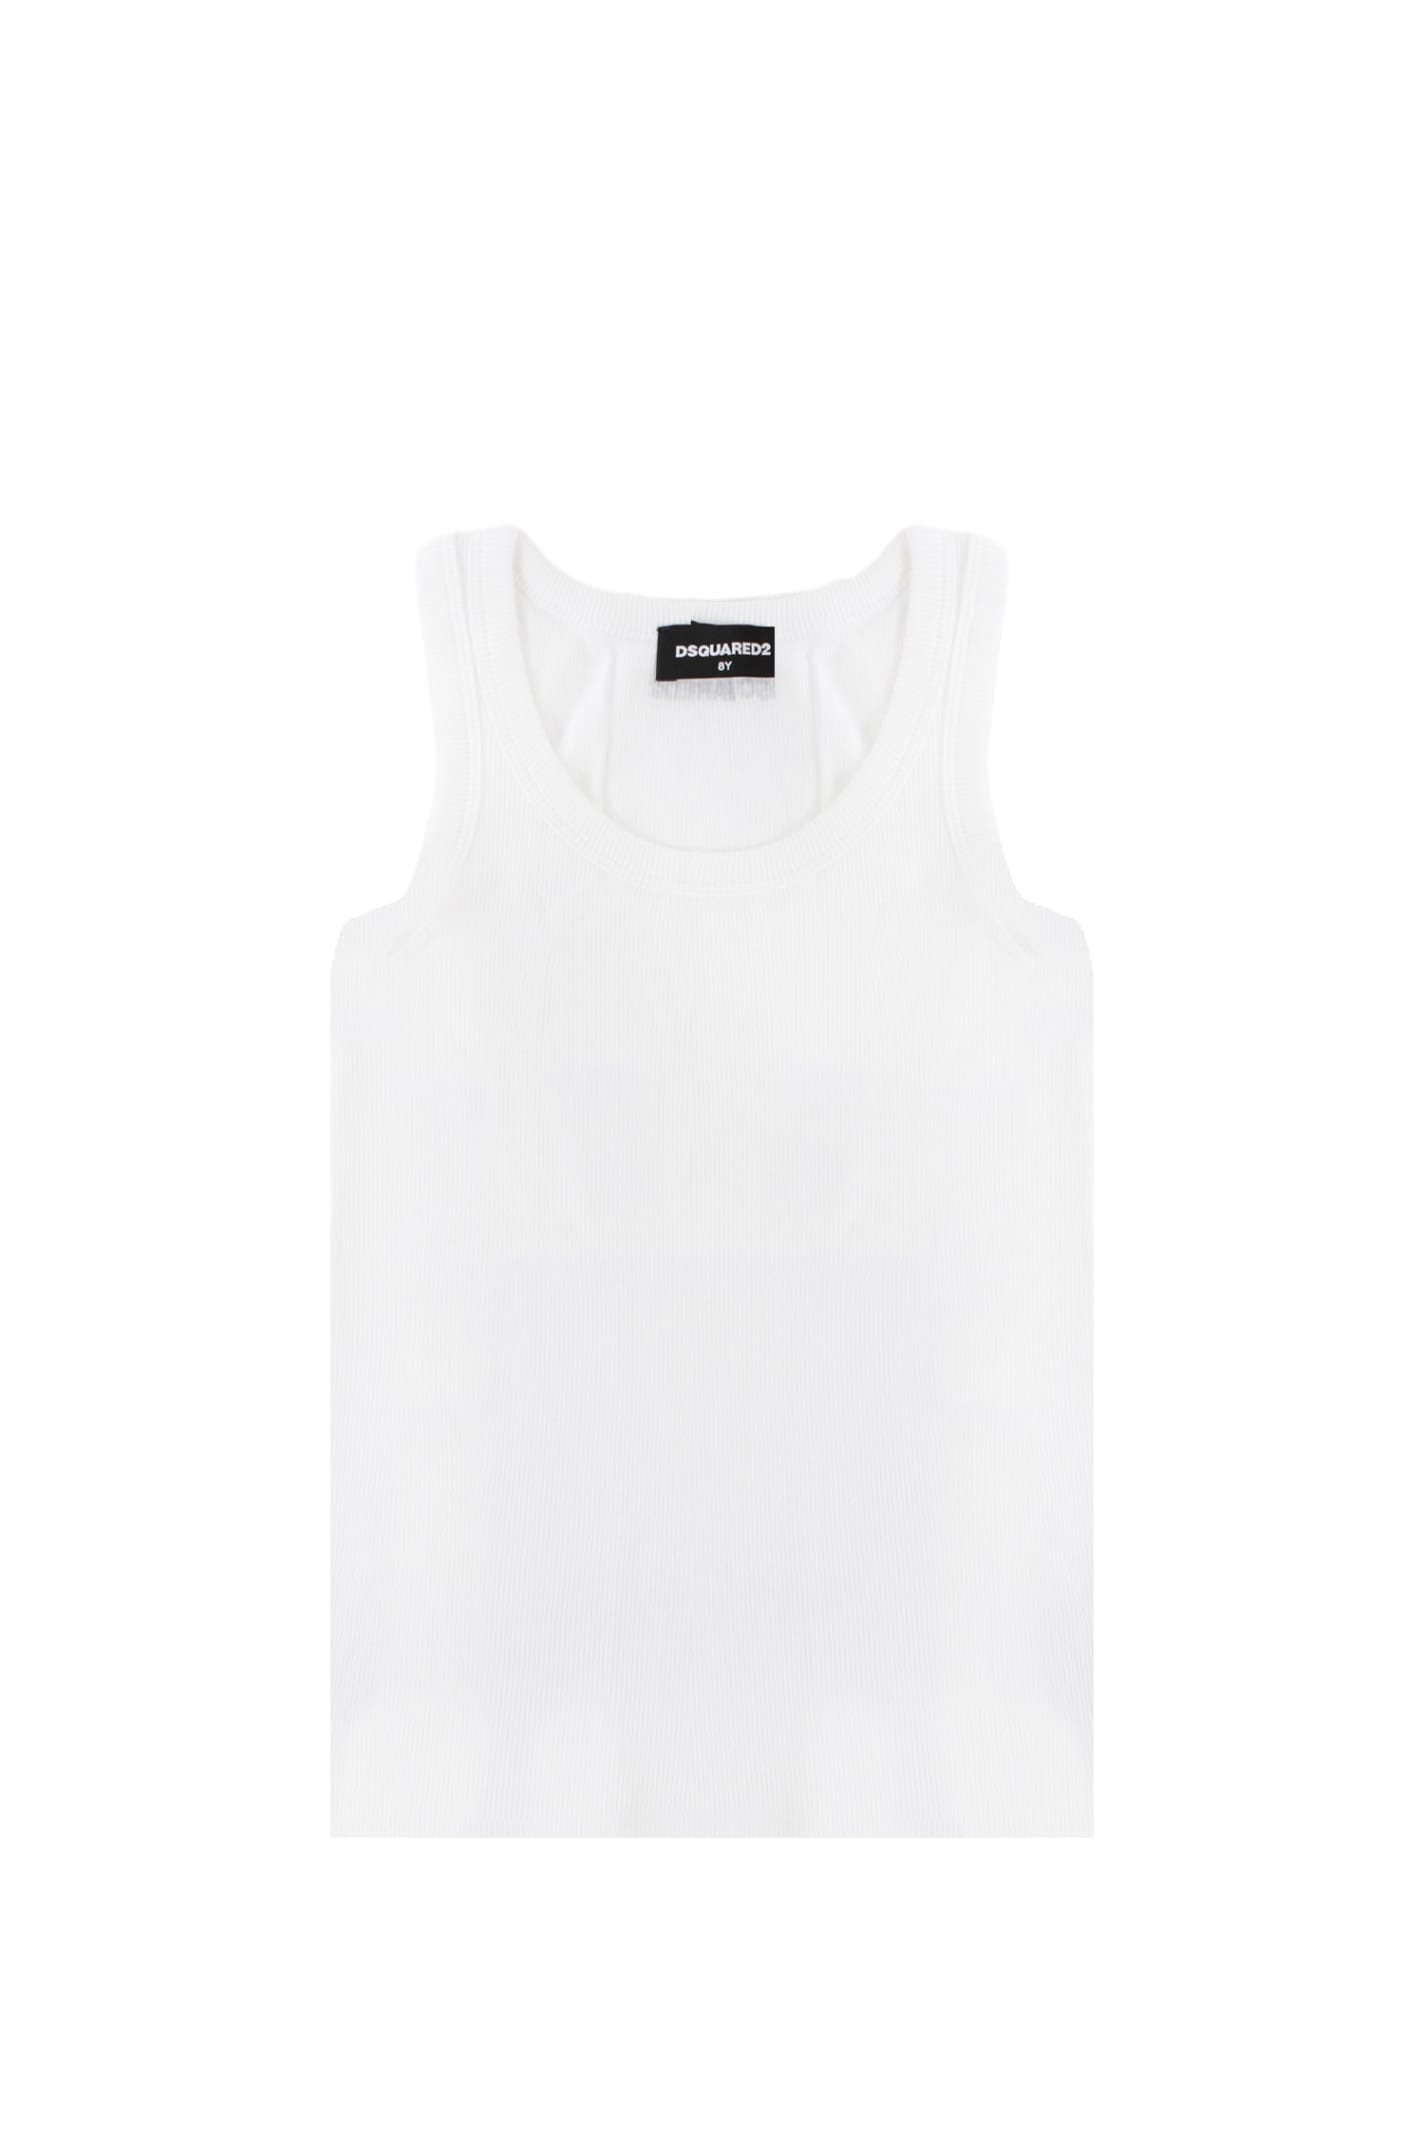 Dsquared2 Kids' Cotton Tank Top In White